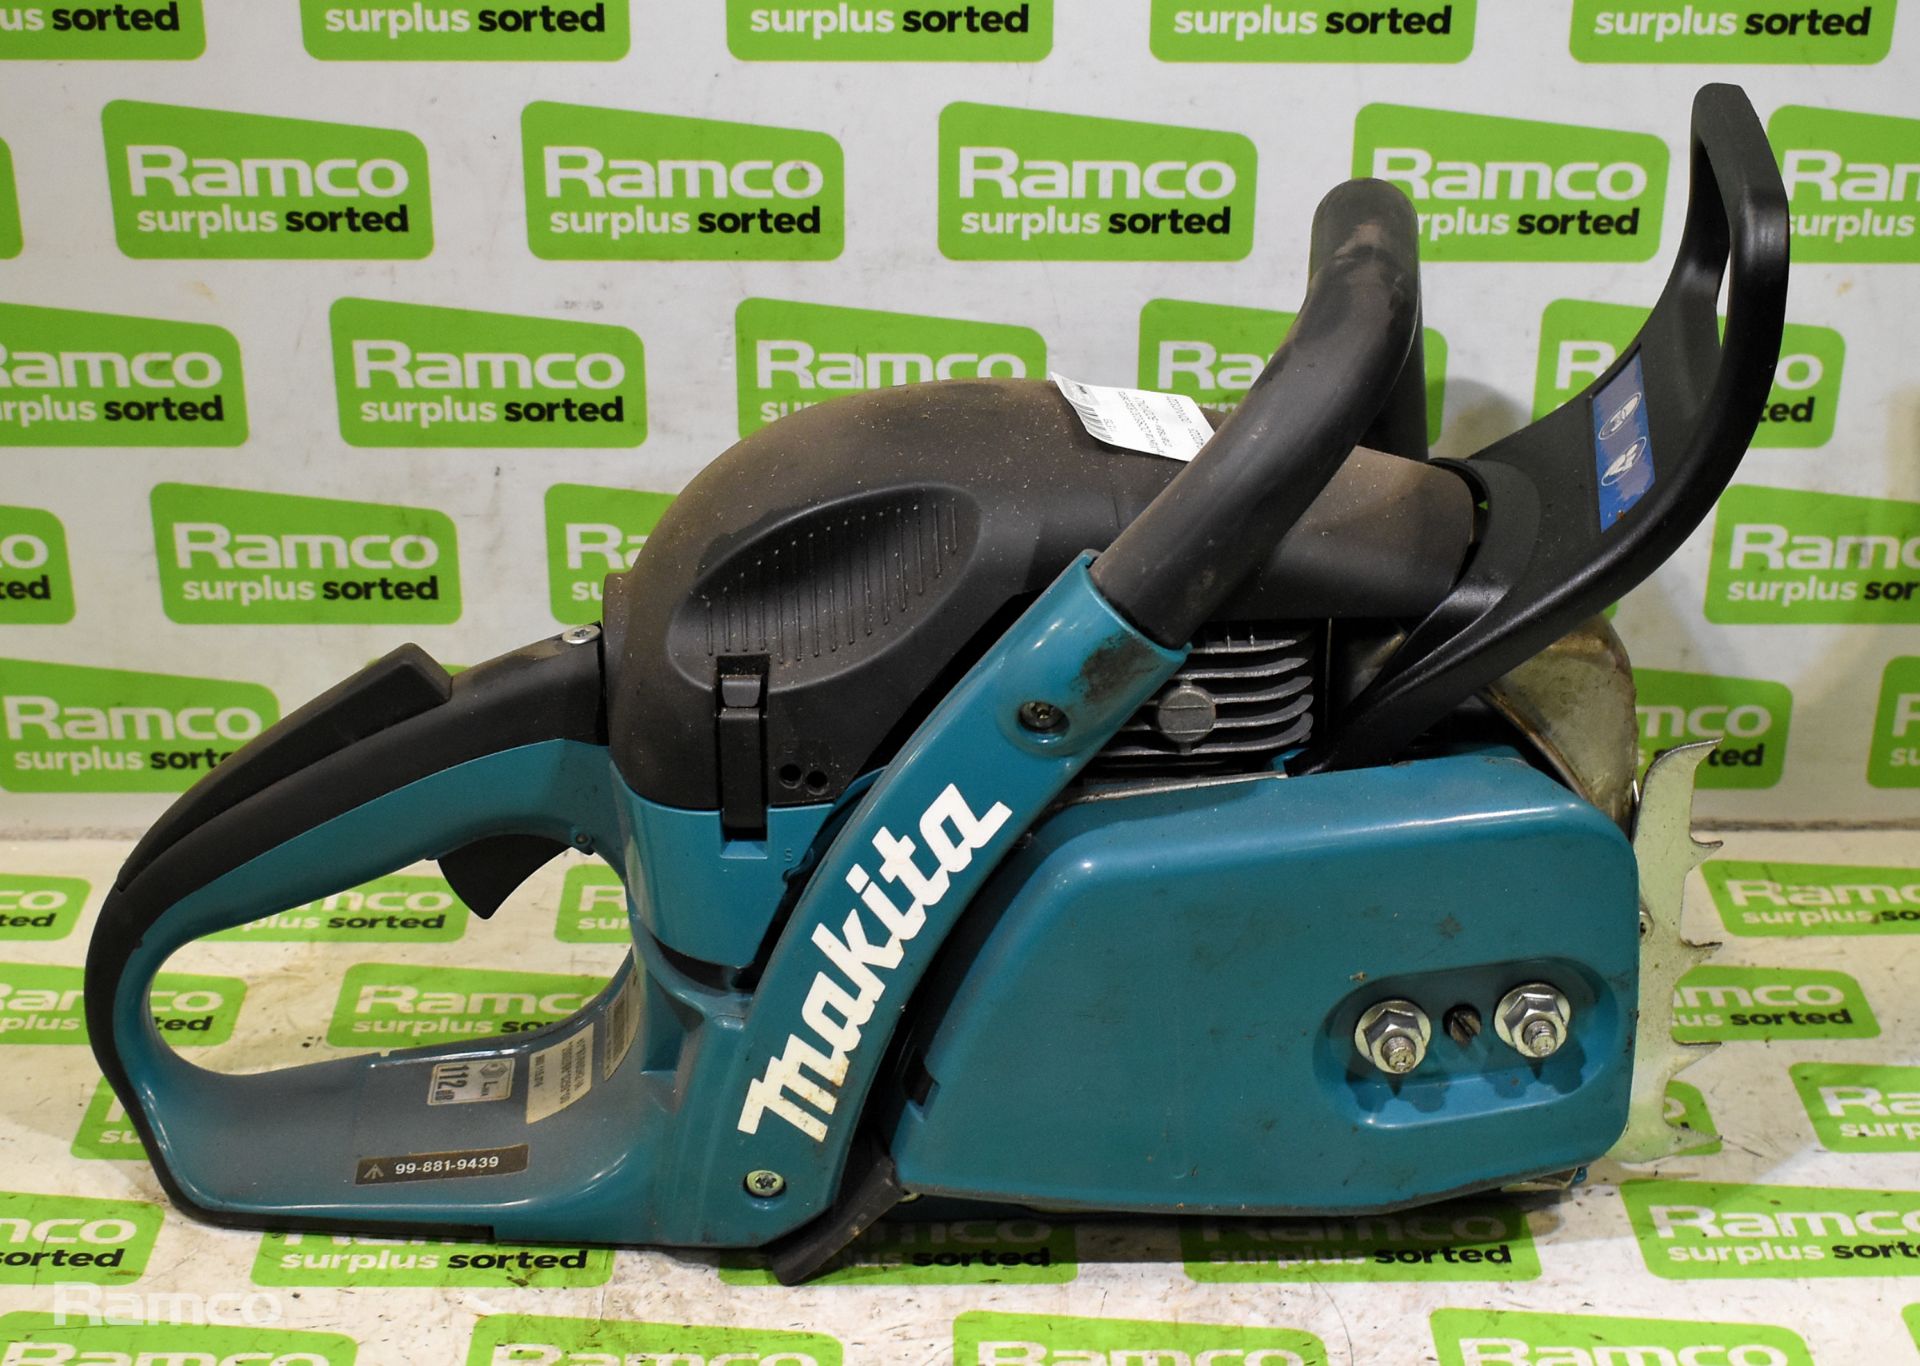 6x Makita DCS5030 50cc petrol chainsaw - BODIES ONLY - AS SPARES & REPAIRS - Image 4 of 33